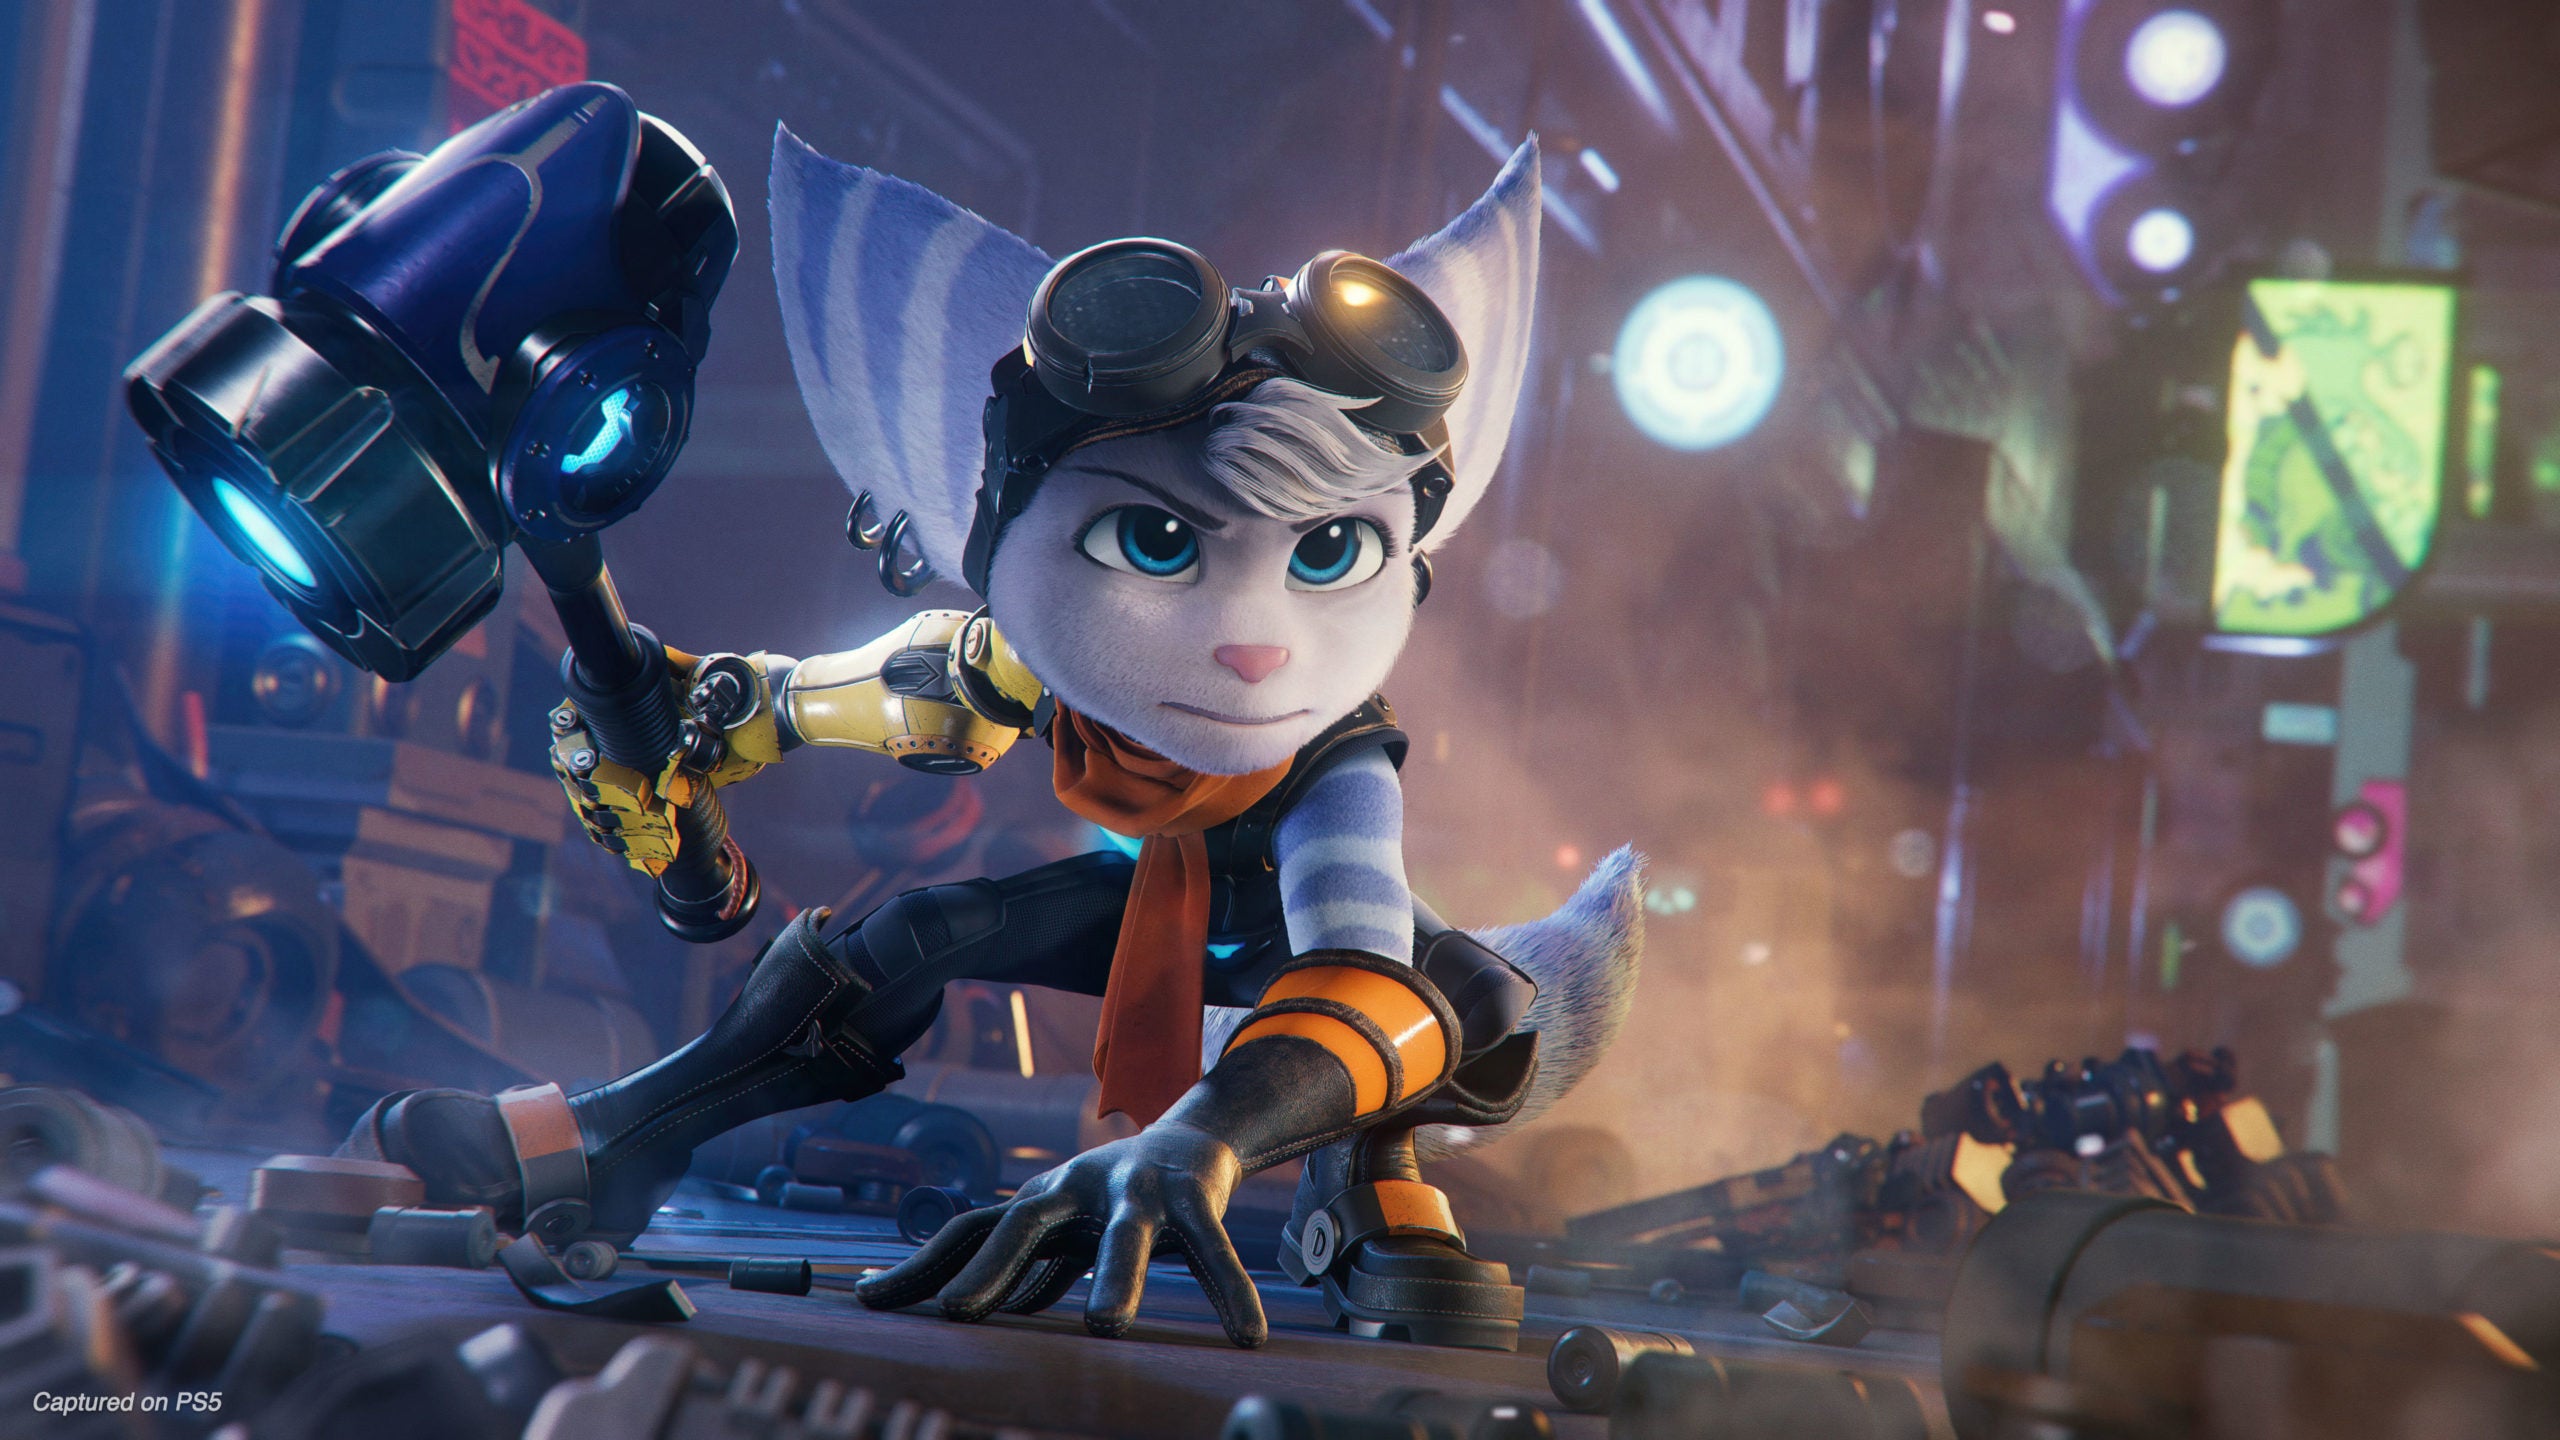 Image for Ratchet & Clank Rift Apart doesn't seem to be coming to PS Plus anytime soon